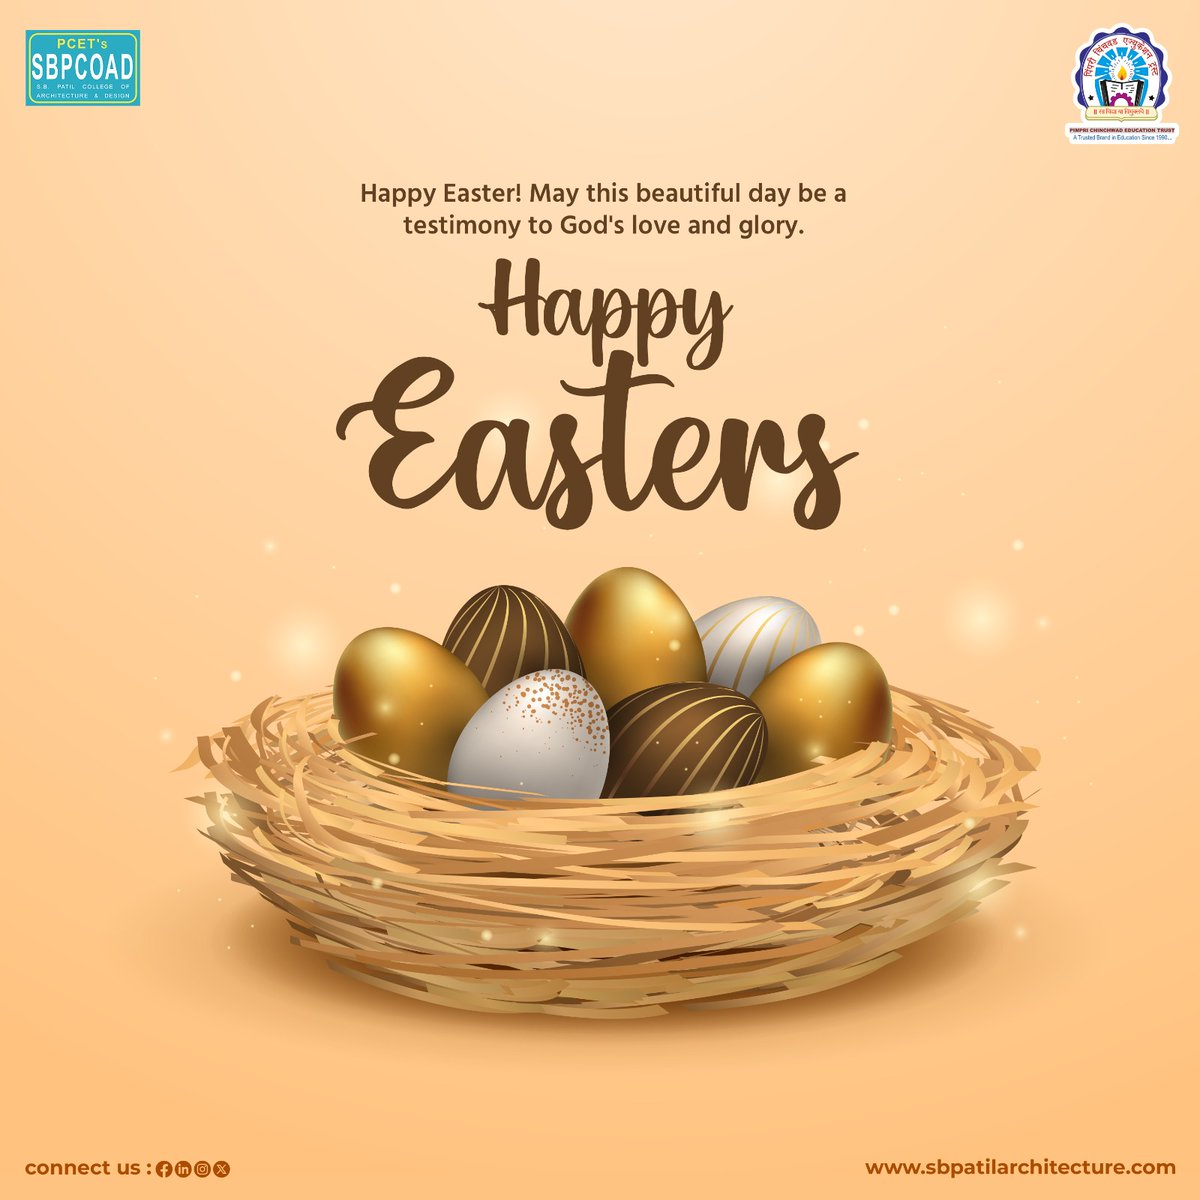 Happy Easter Sunday..! Today, let’s reflect on the true meaning of this day—the resurrection of Jesus Christ and the gift of salvation. May His love and grace fill your heart with joy and peace. #PCET #SBPCOAD #EasterSunday #EasterSunday2024 #Easter2024 #EasterWeekend #Easter